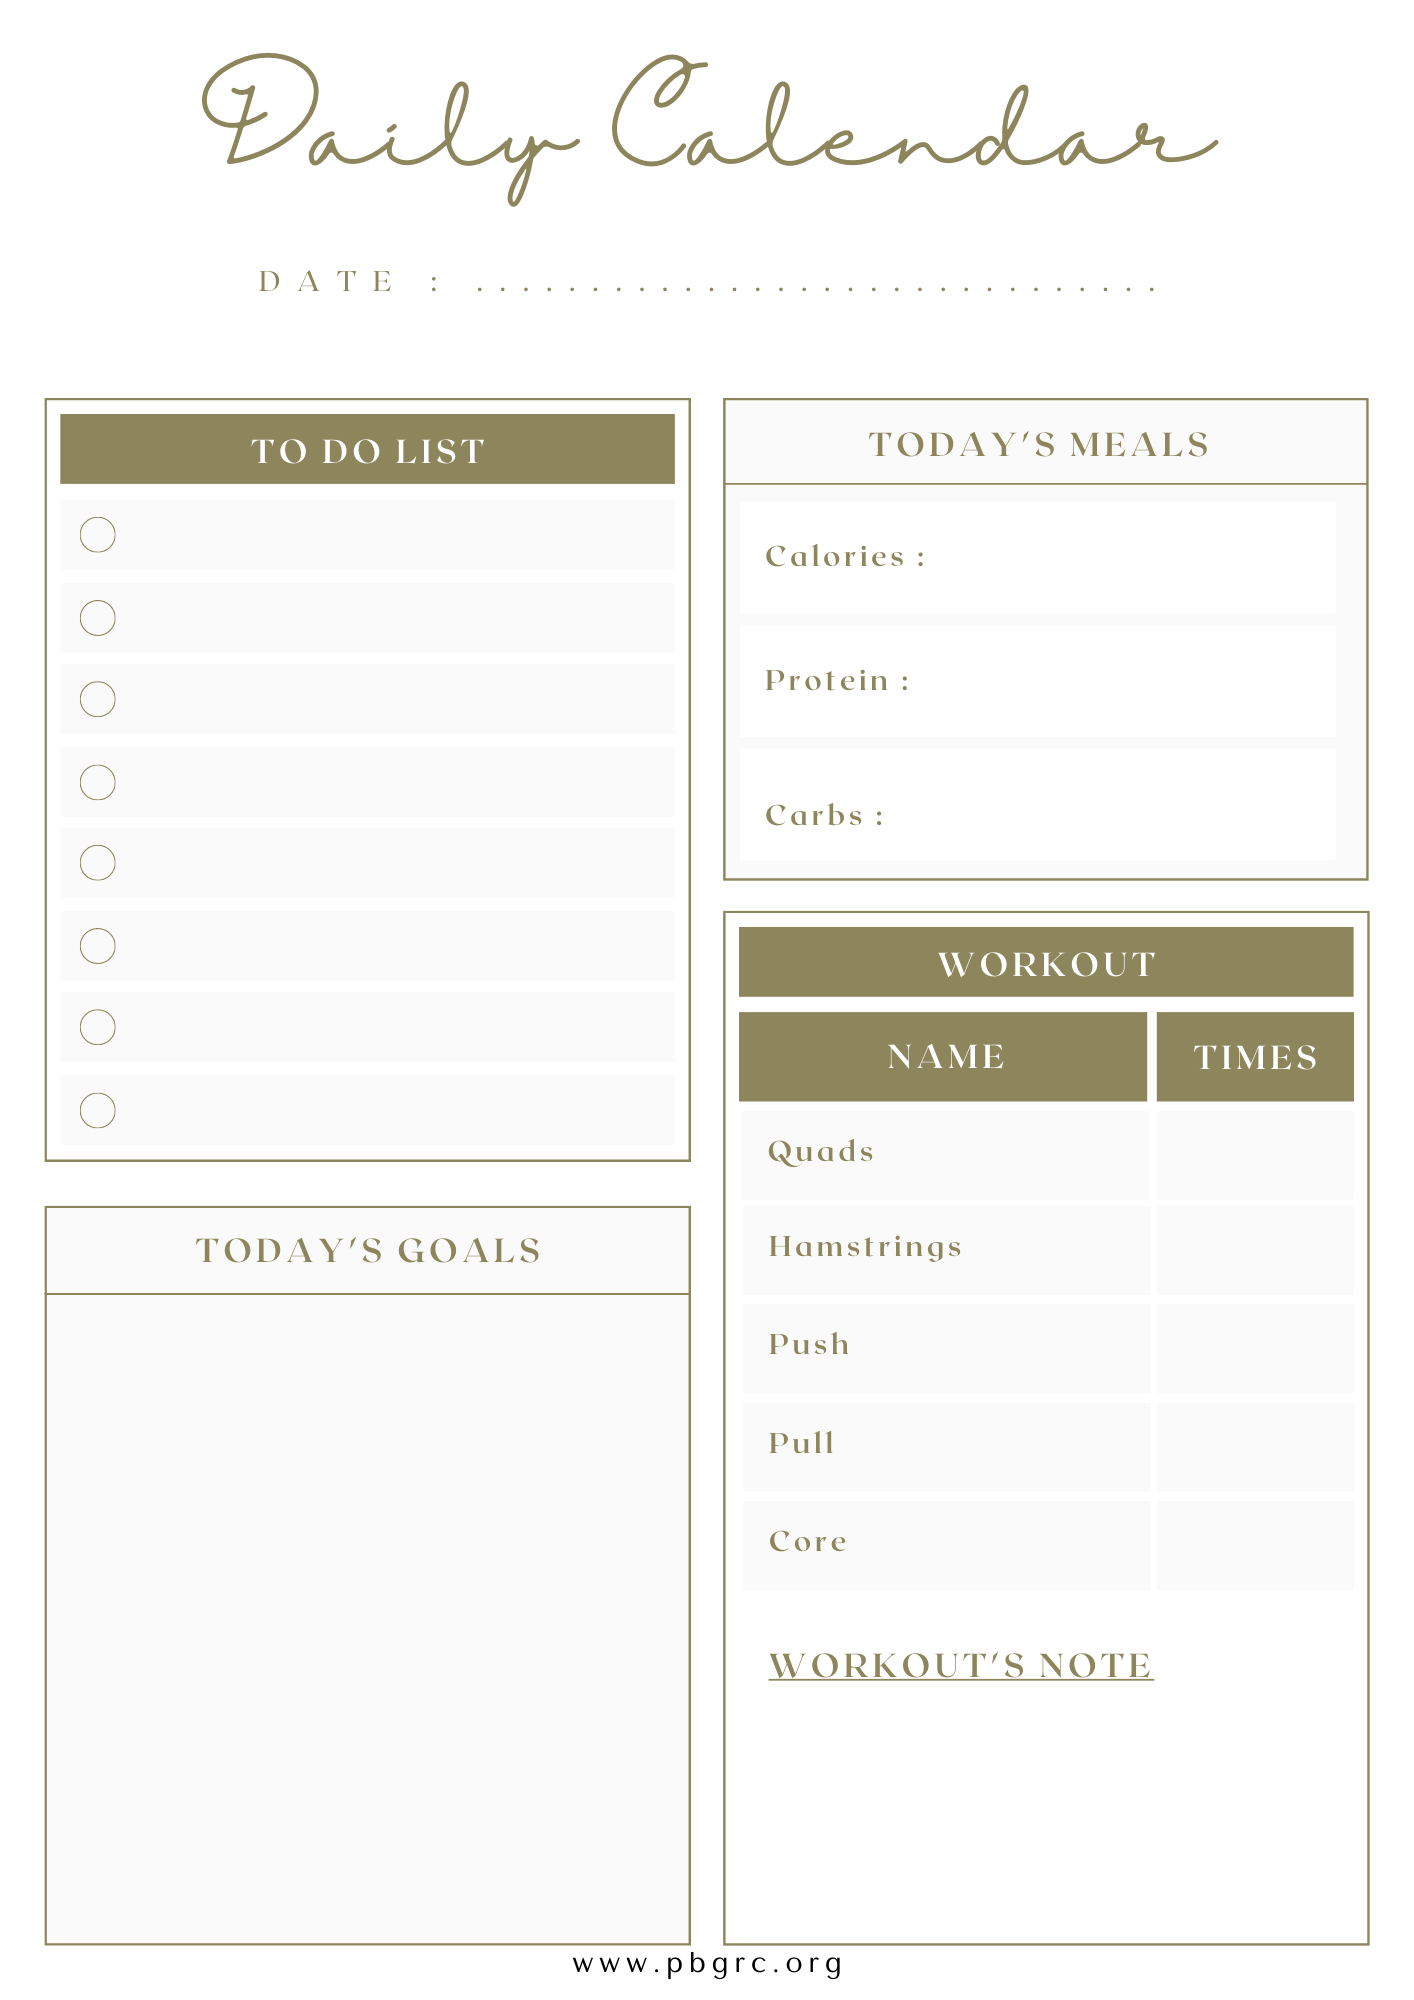 Weekly To-Do List Template for Work and Home in PDF Format